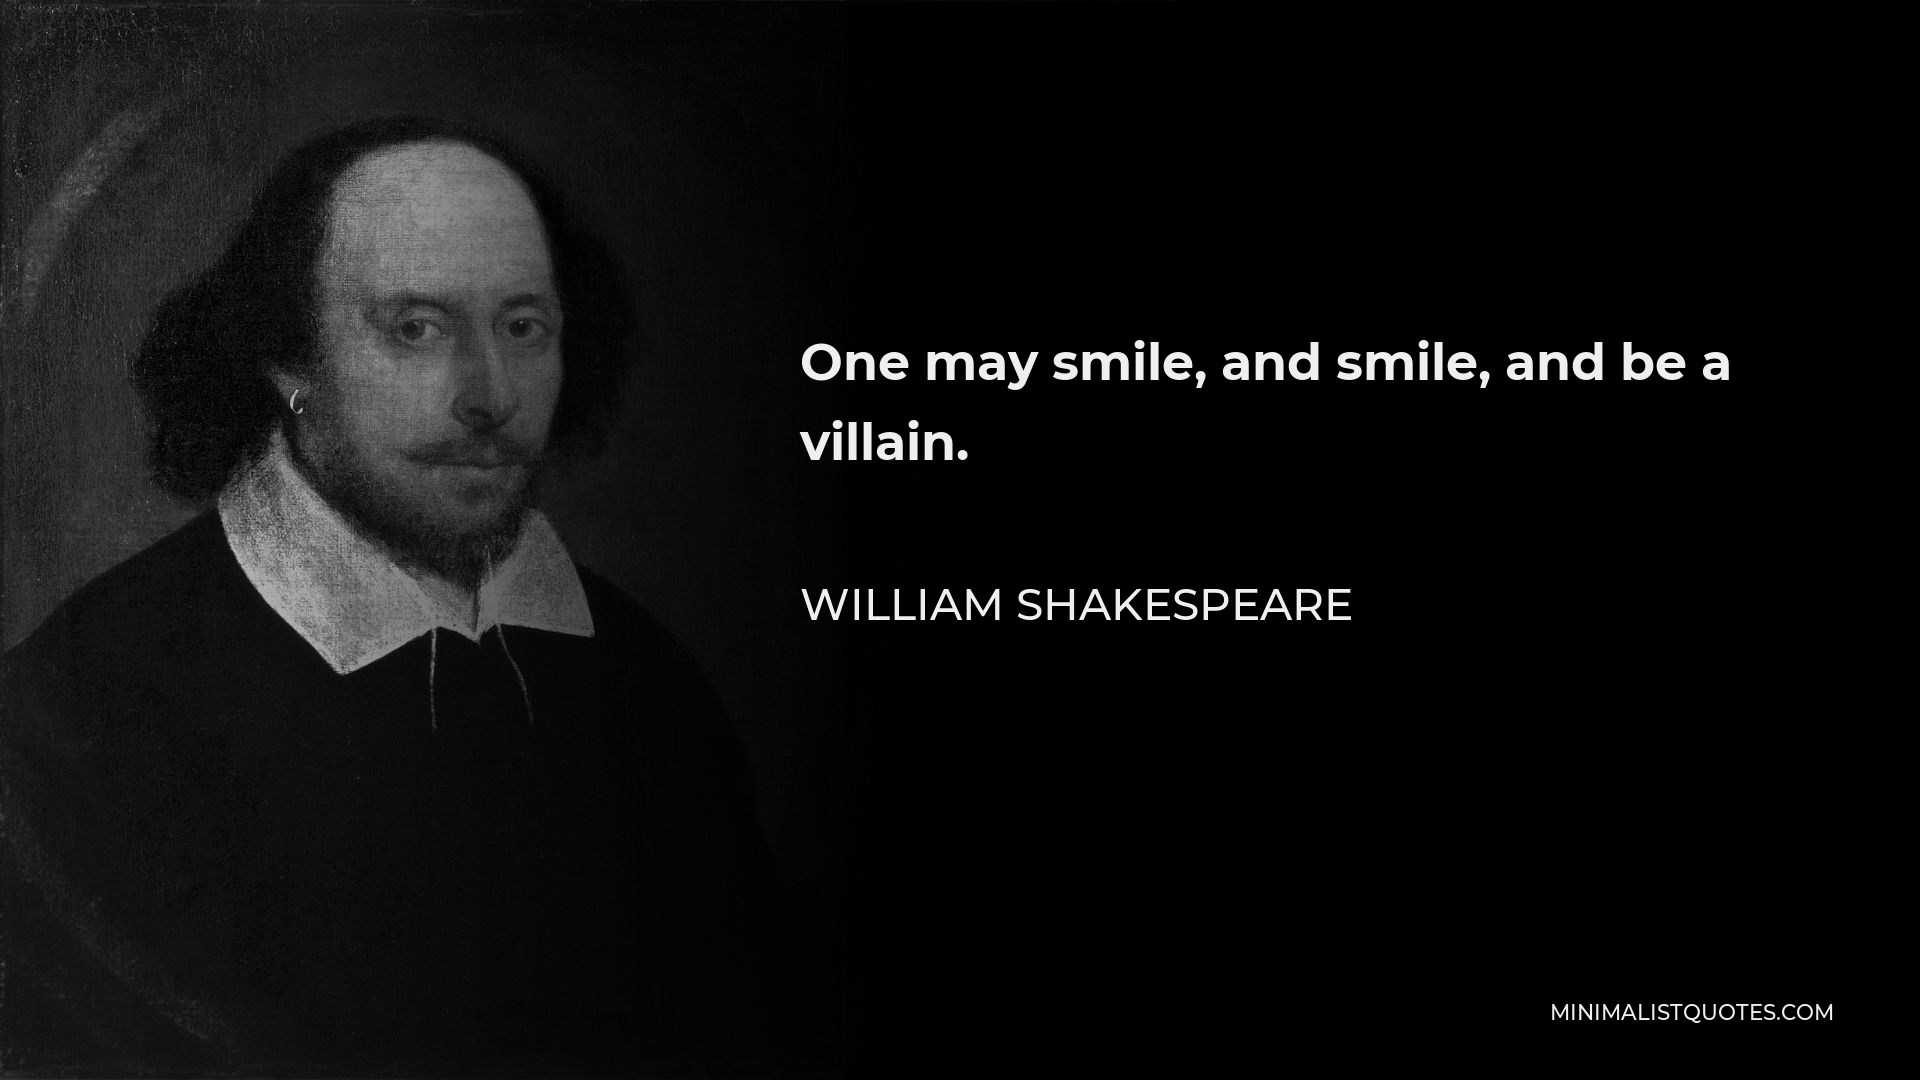 William Shakespeare Quote - One may smile, and smile, and be a villain.